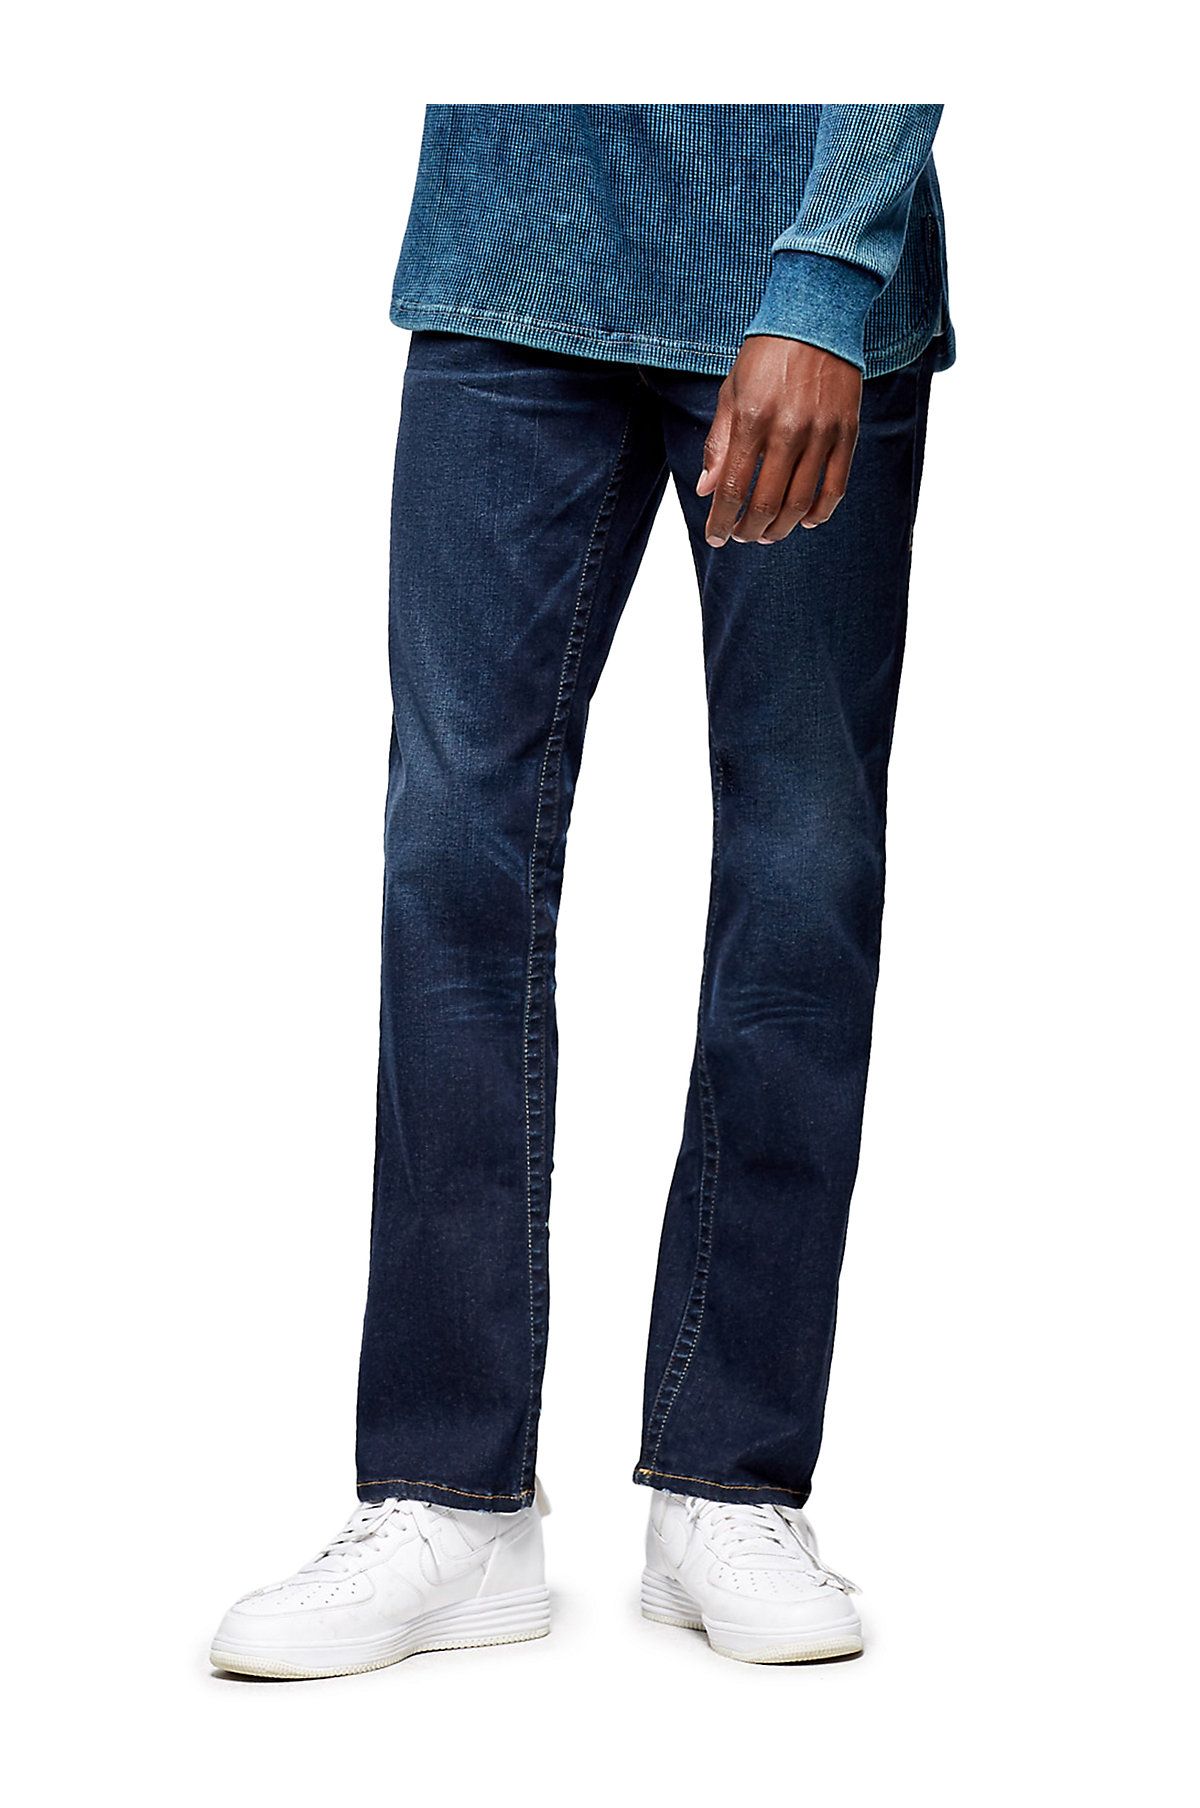 where can i buy true religion jeans near me